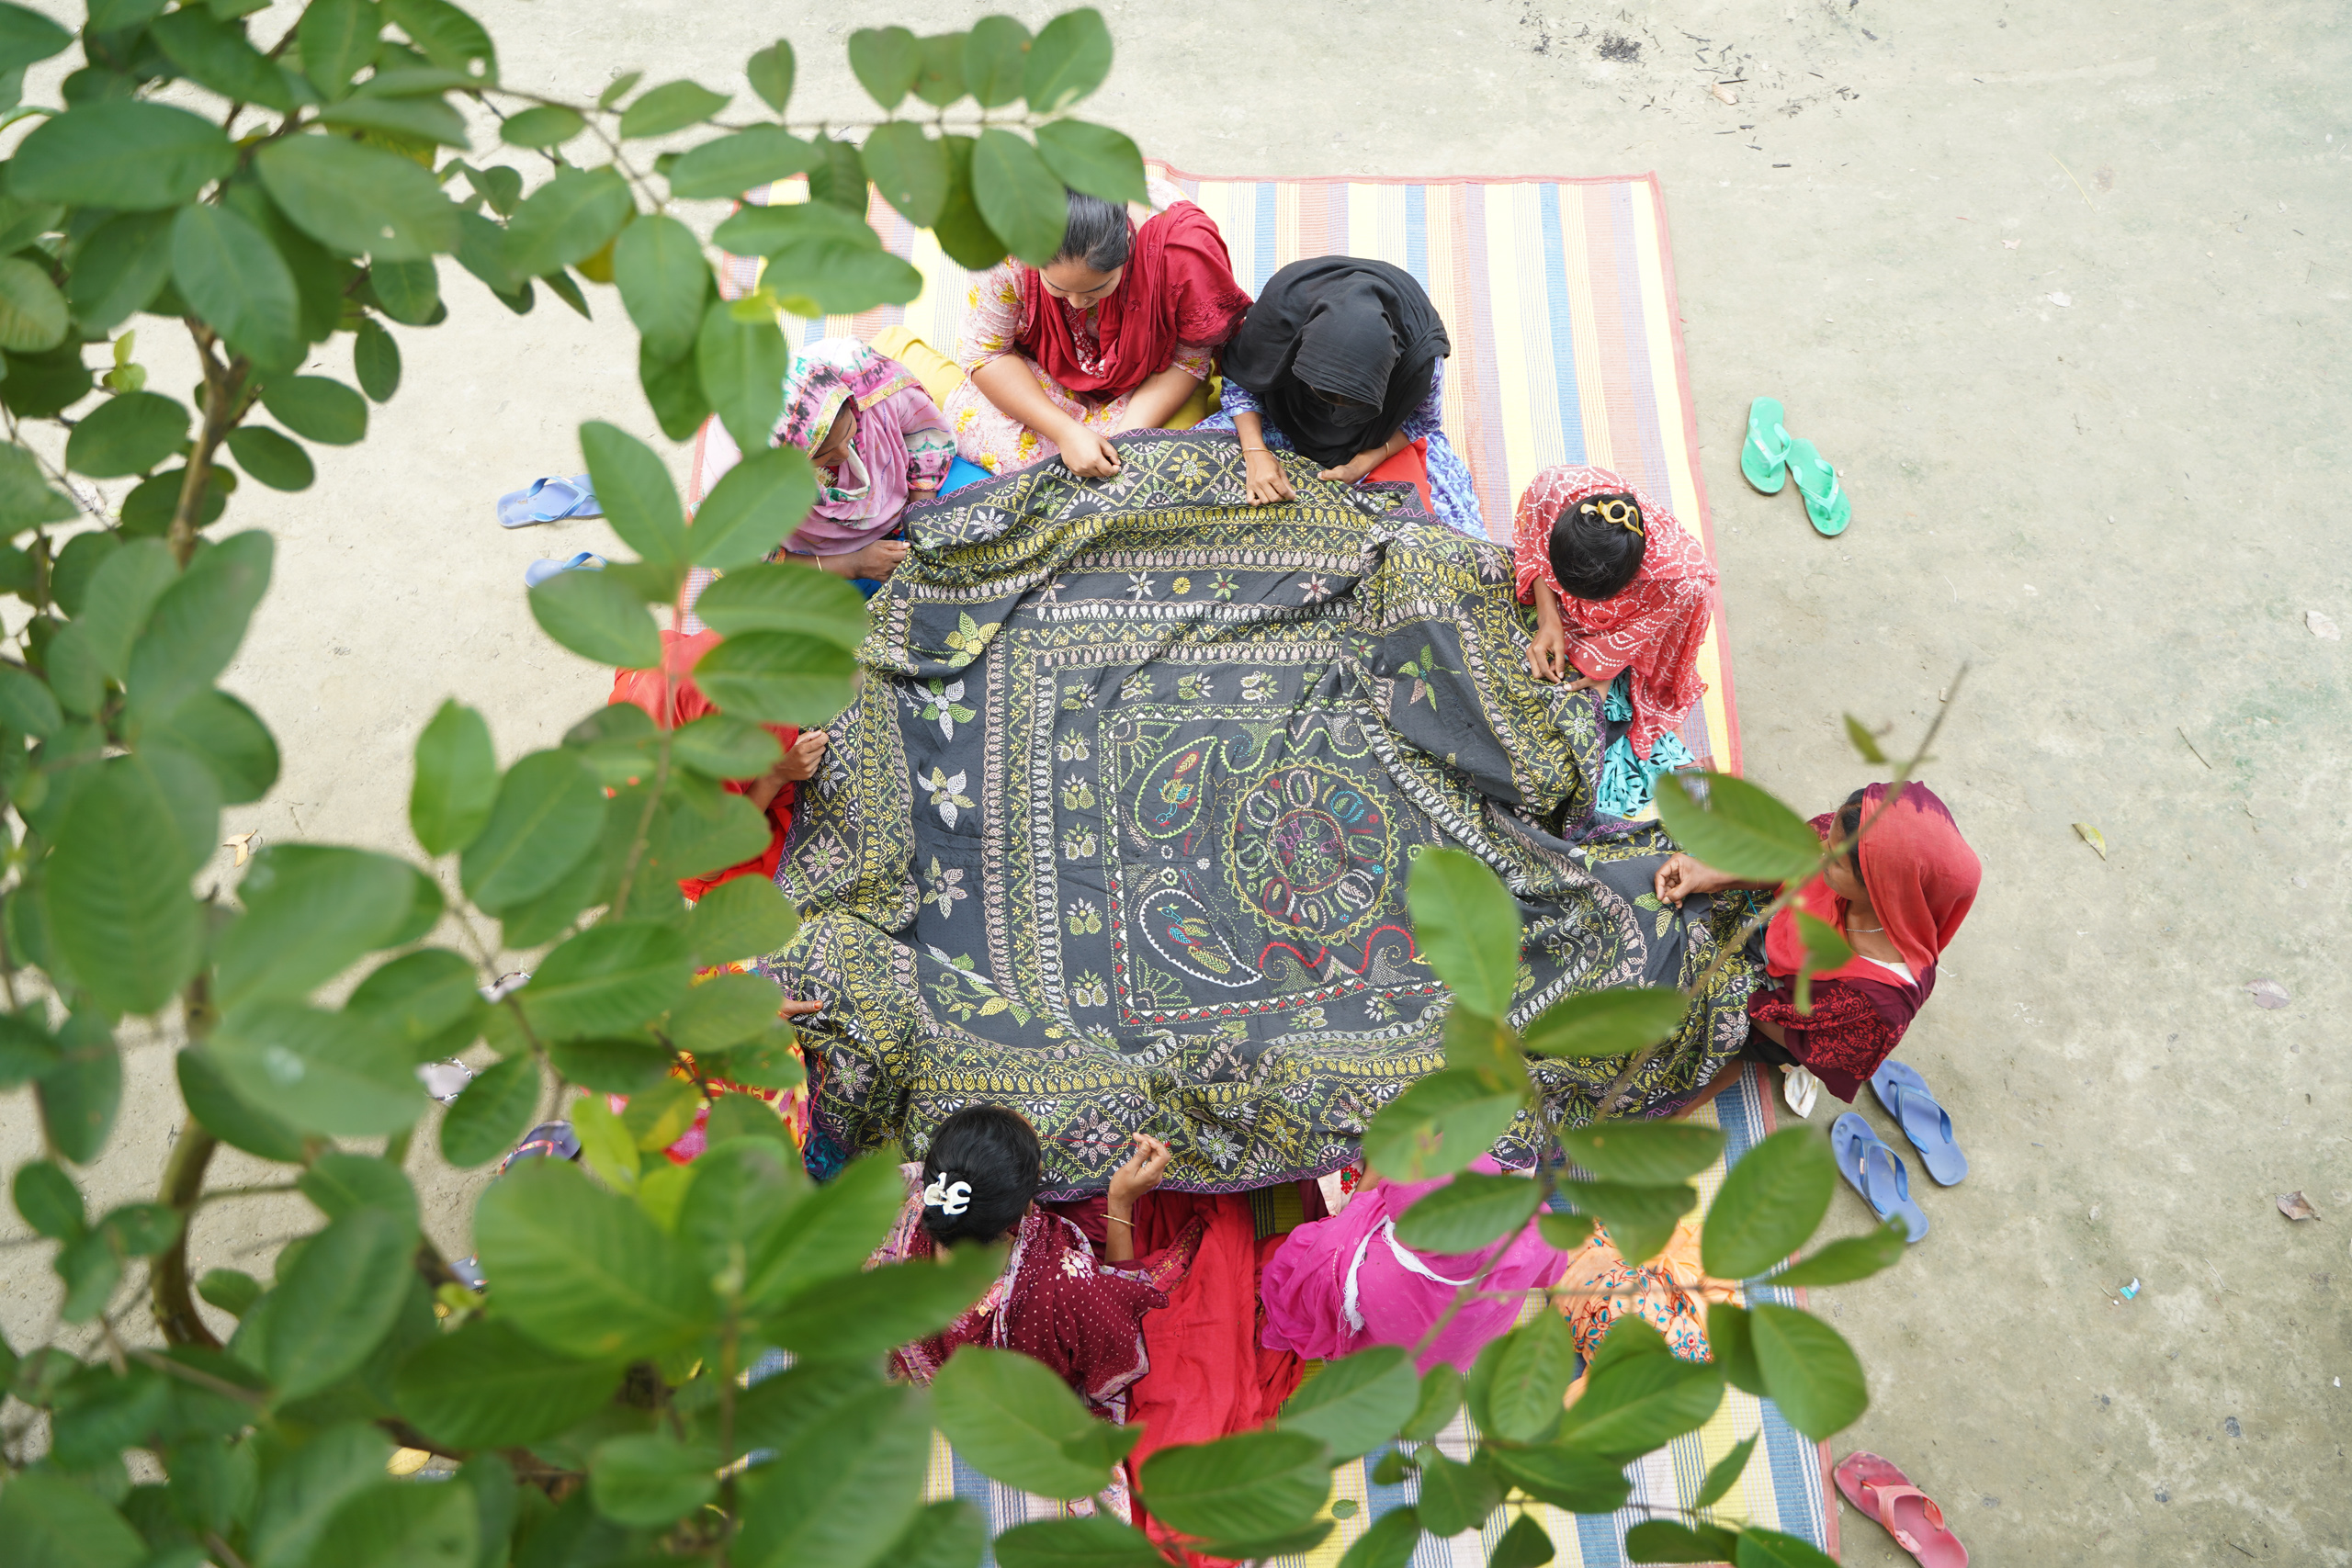 <p>Women in Jamalpur district of Bangladesh stitch <em>nakshi kantha</em> together after finishing their household chores for the day. They are working for local entrepreneurs, who design the works and will sell them on. (Image: Nazmun Naher Shishir / The Third Pole)</p>